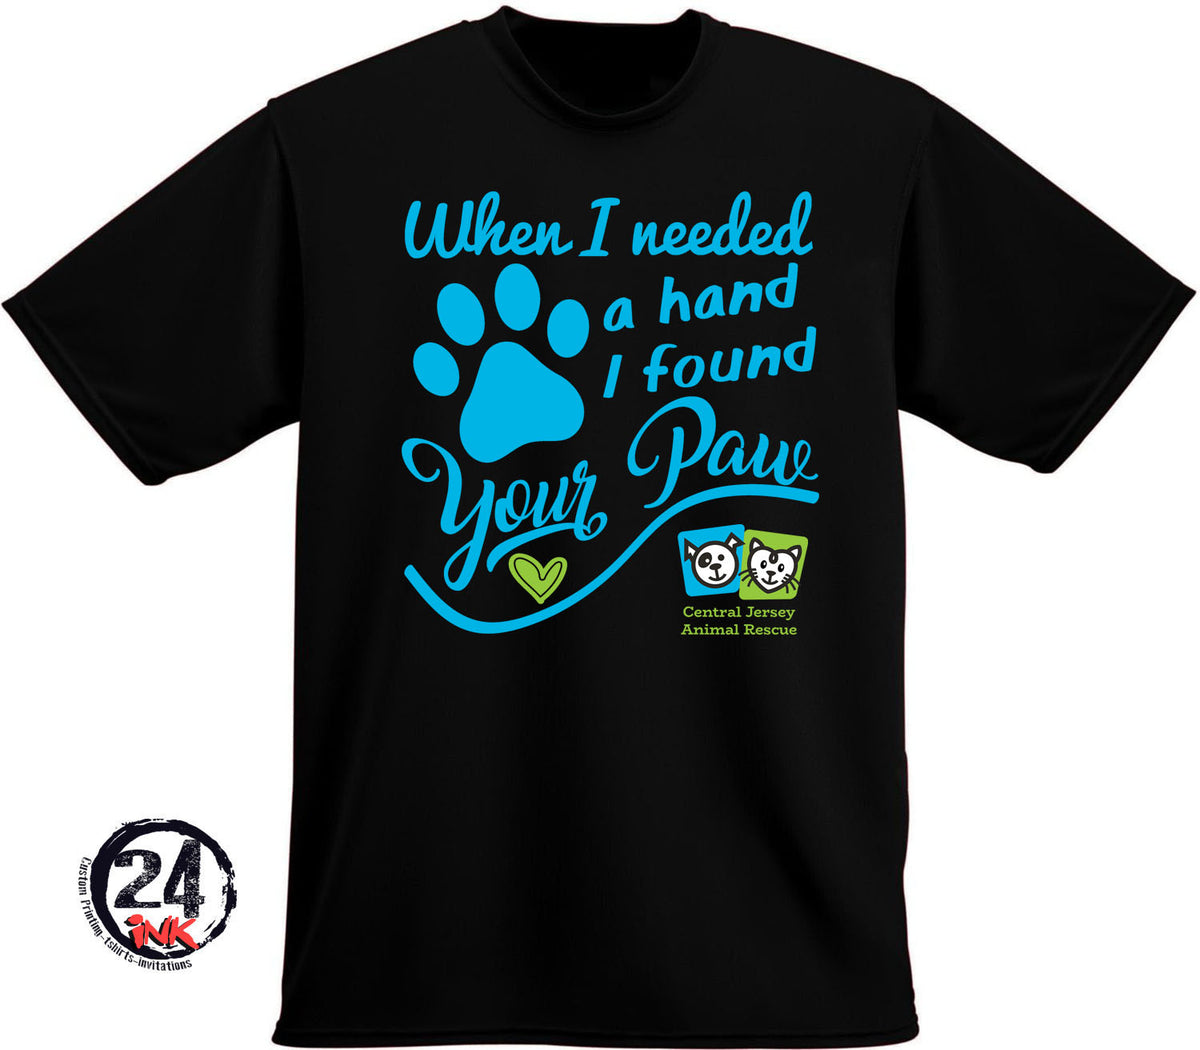 I found your paw t-shirt